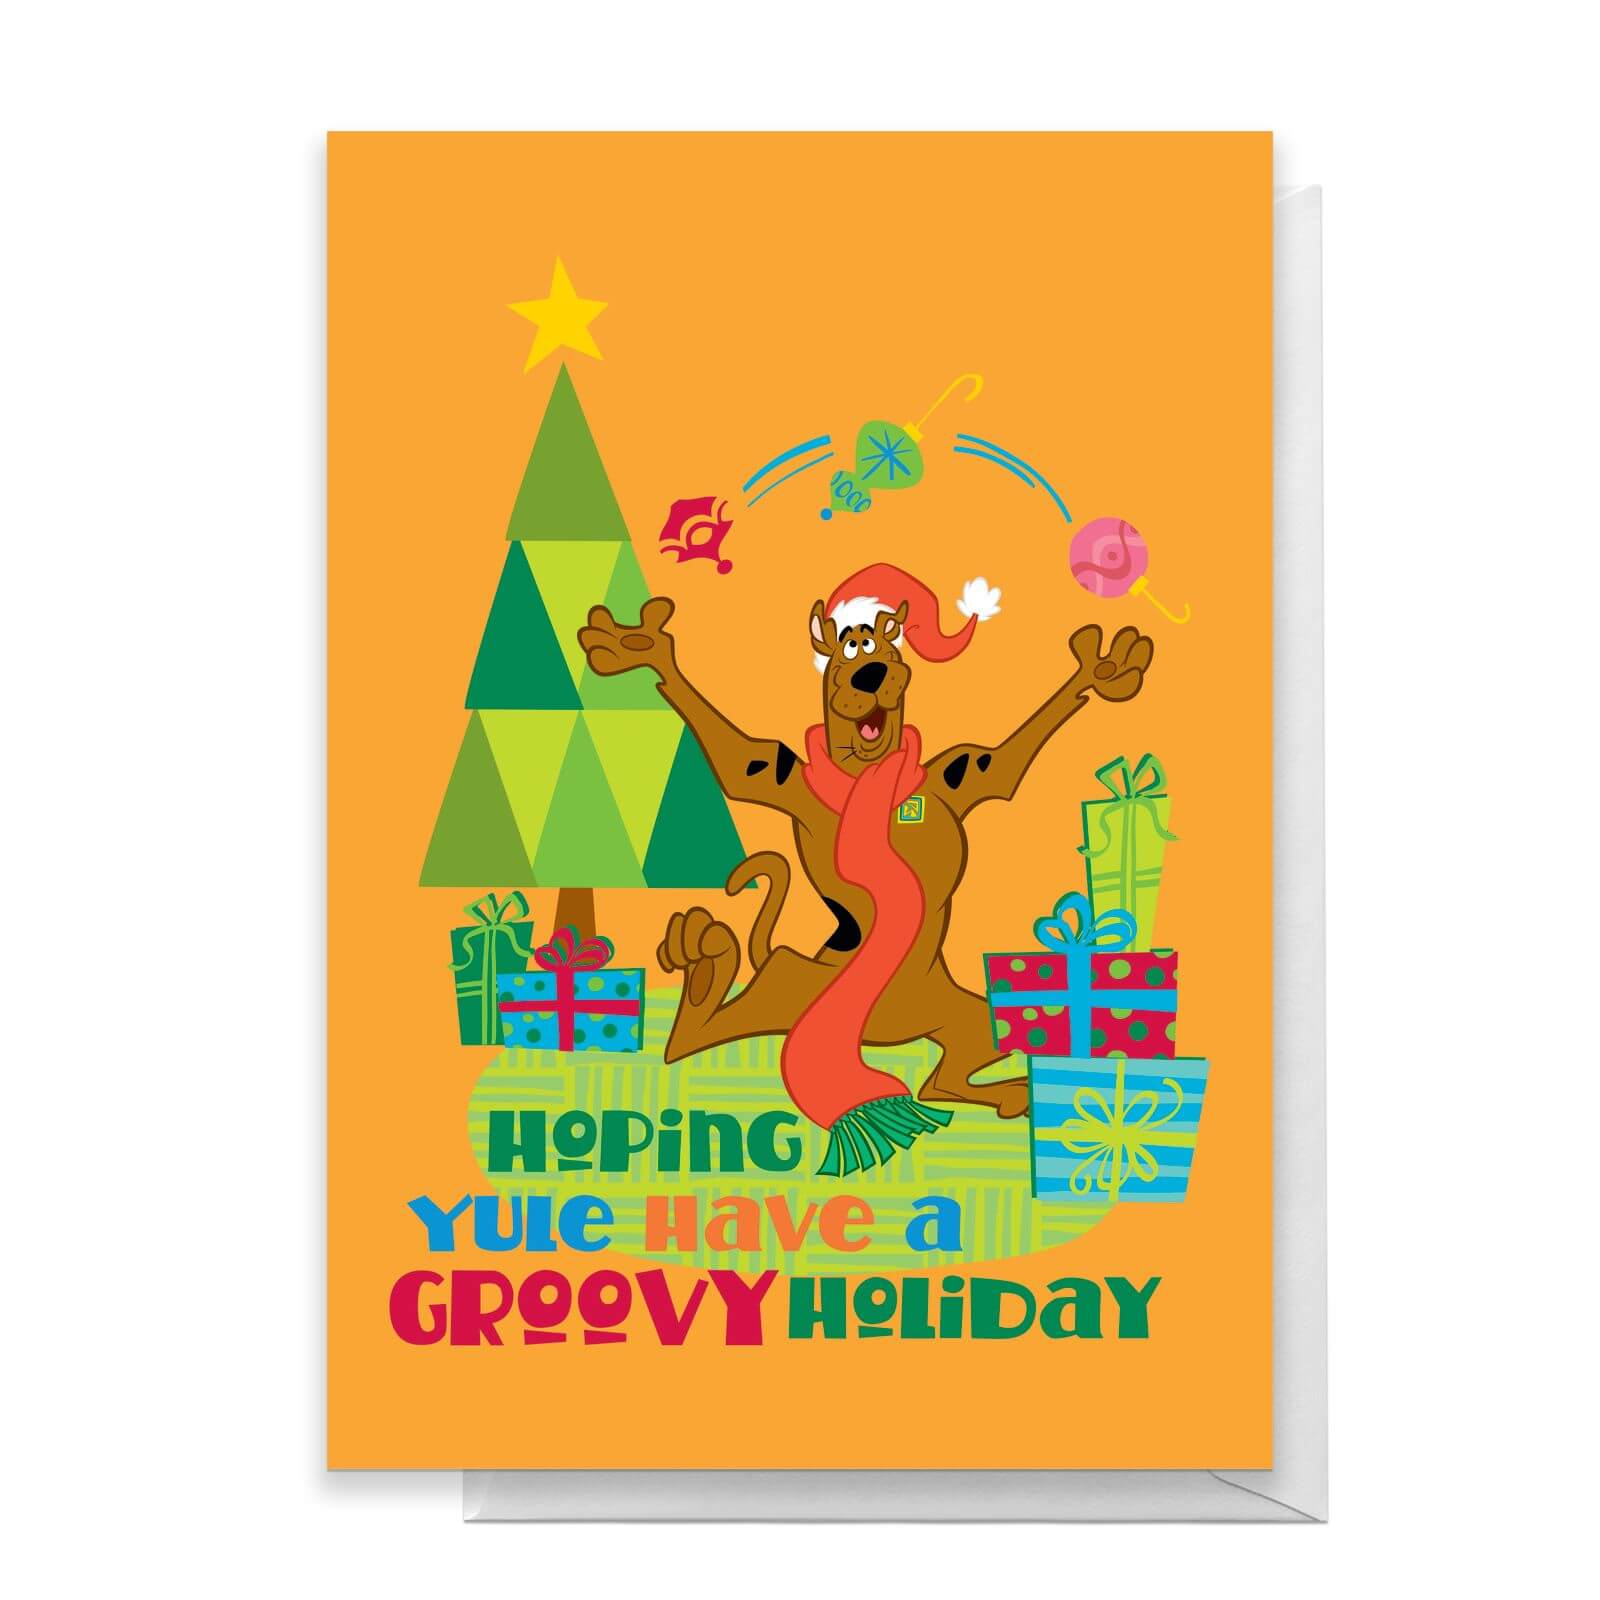 Scooby Doo Hoping Yule Have A Groovy Holiday Greetings Card   Standard Card